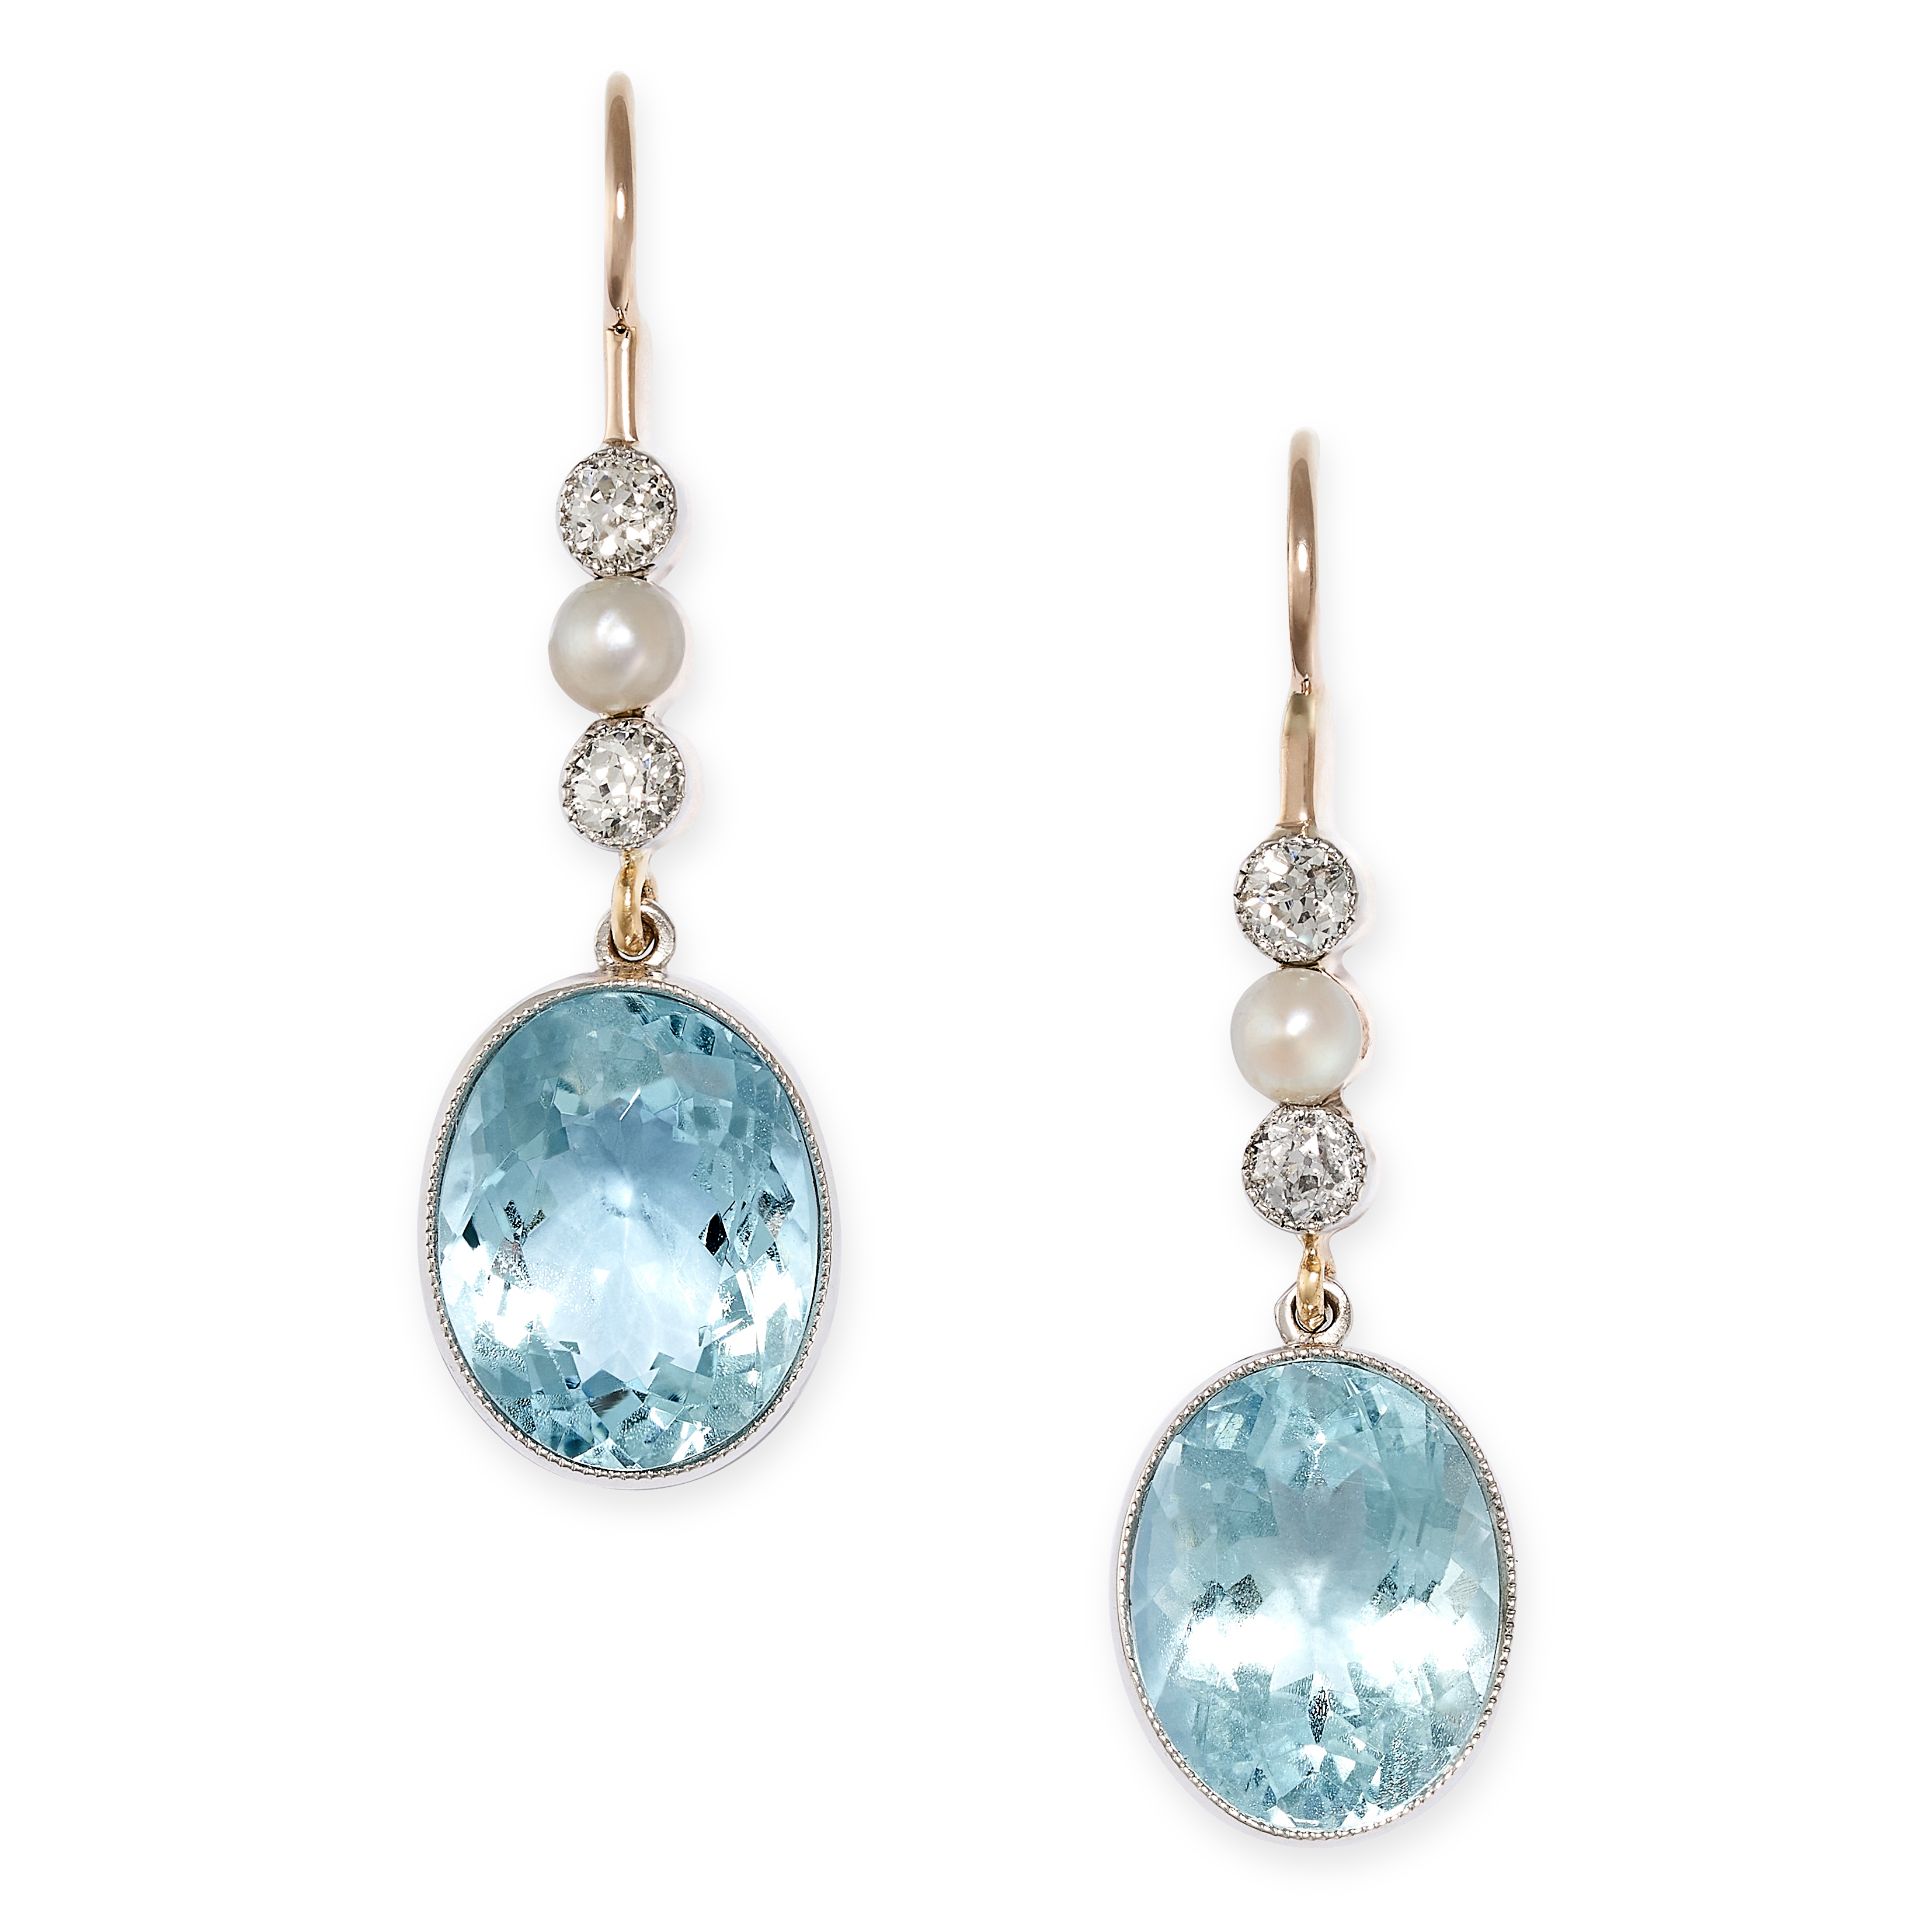 A PAIR OF AQUAMARINE, DIAMOND AND PEARL EARRINGS each set with old cut diamonds and a pearl,